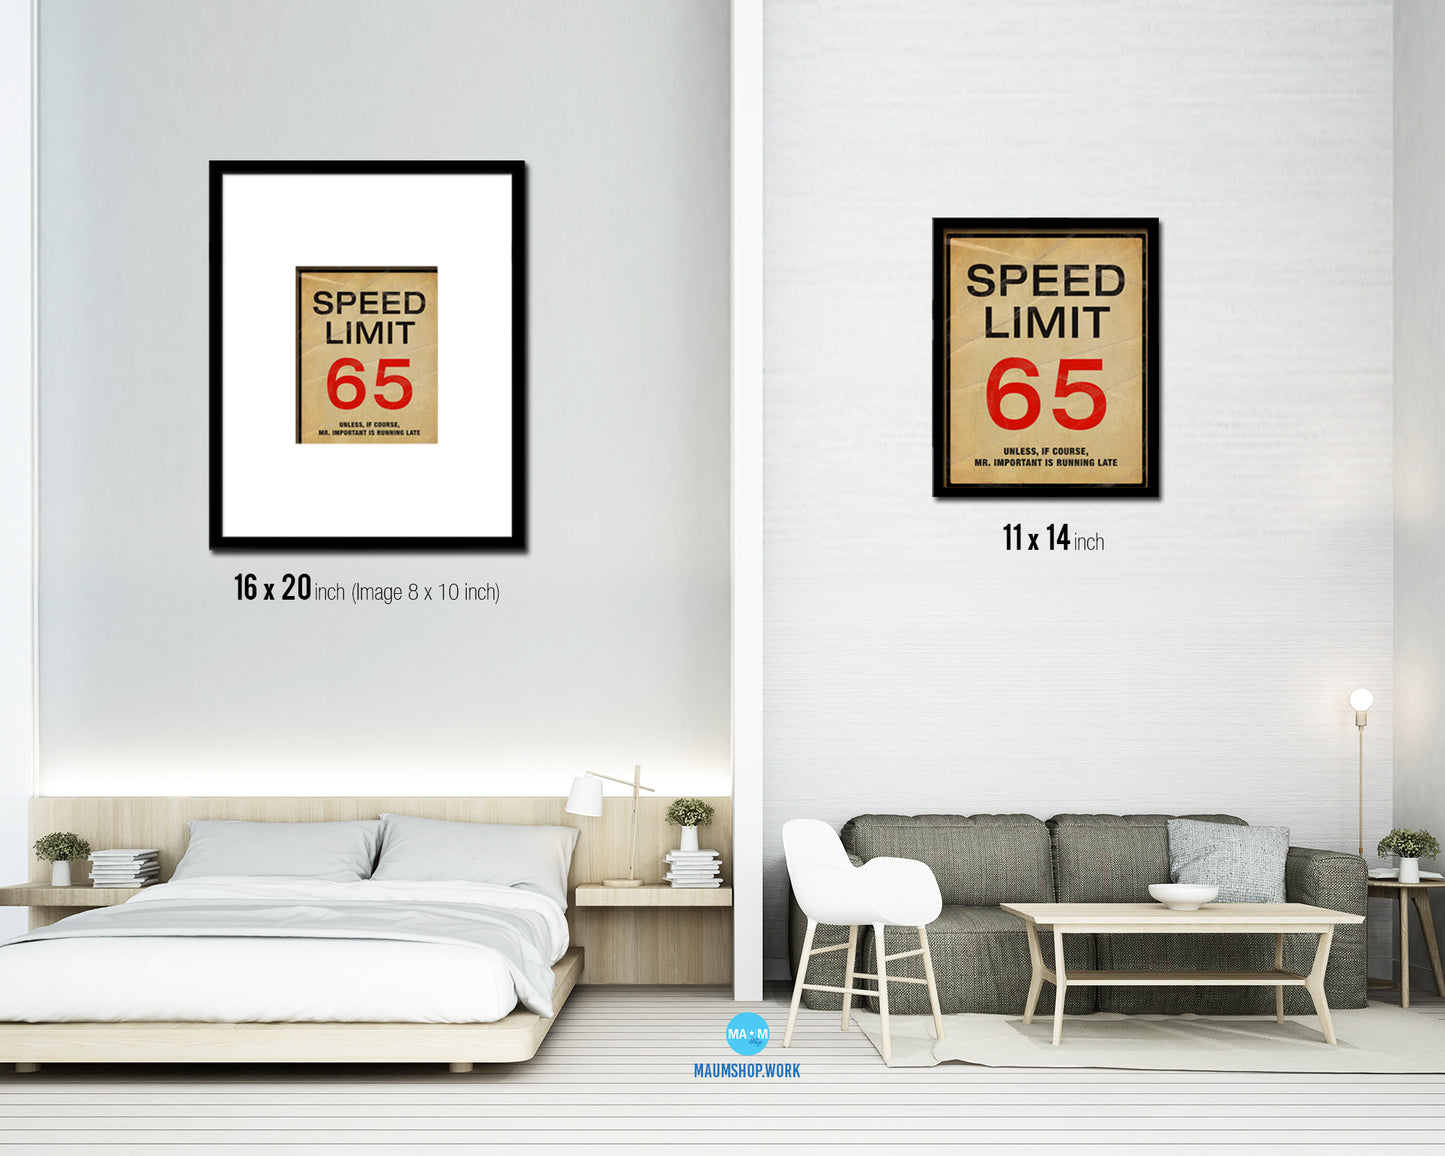 Speed limit 65 unless of course Mr important is running late Notice Danger Sign Framed Print Art